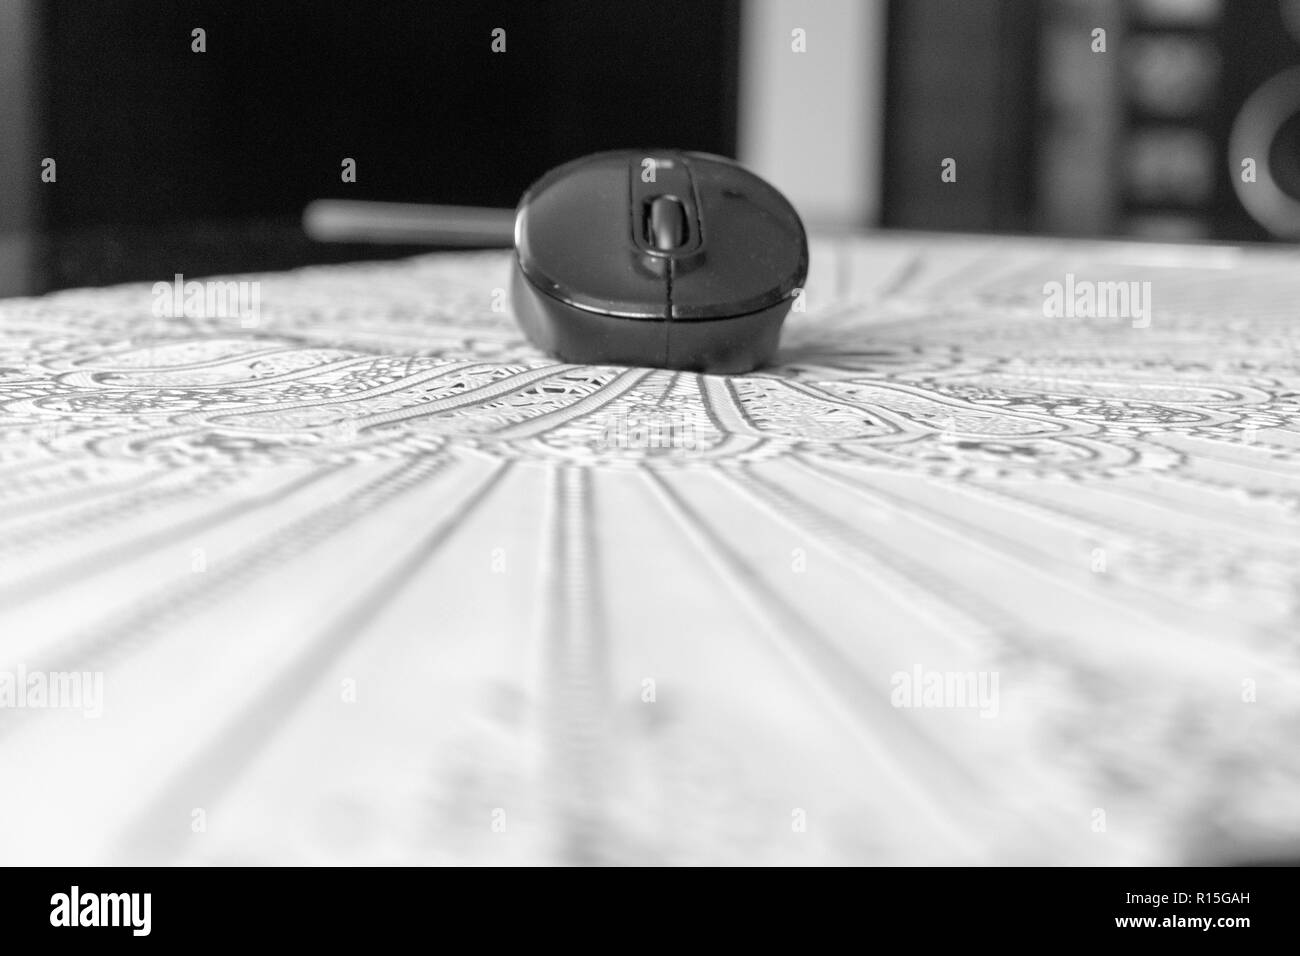 Low angle view of a black bluetooth computer mouse Stock Photo